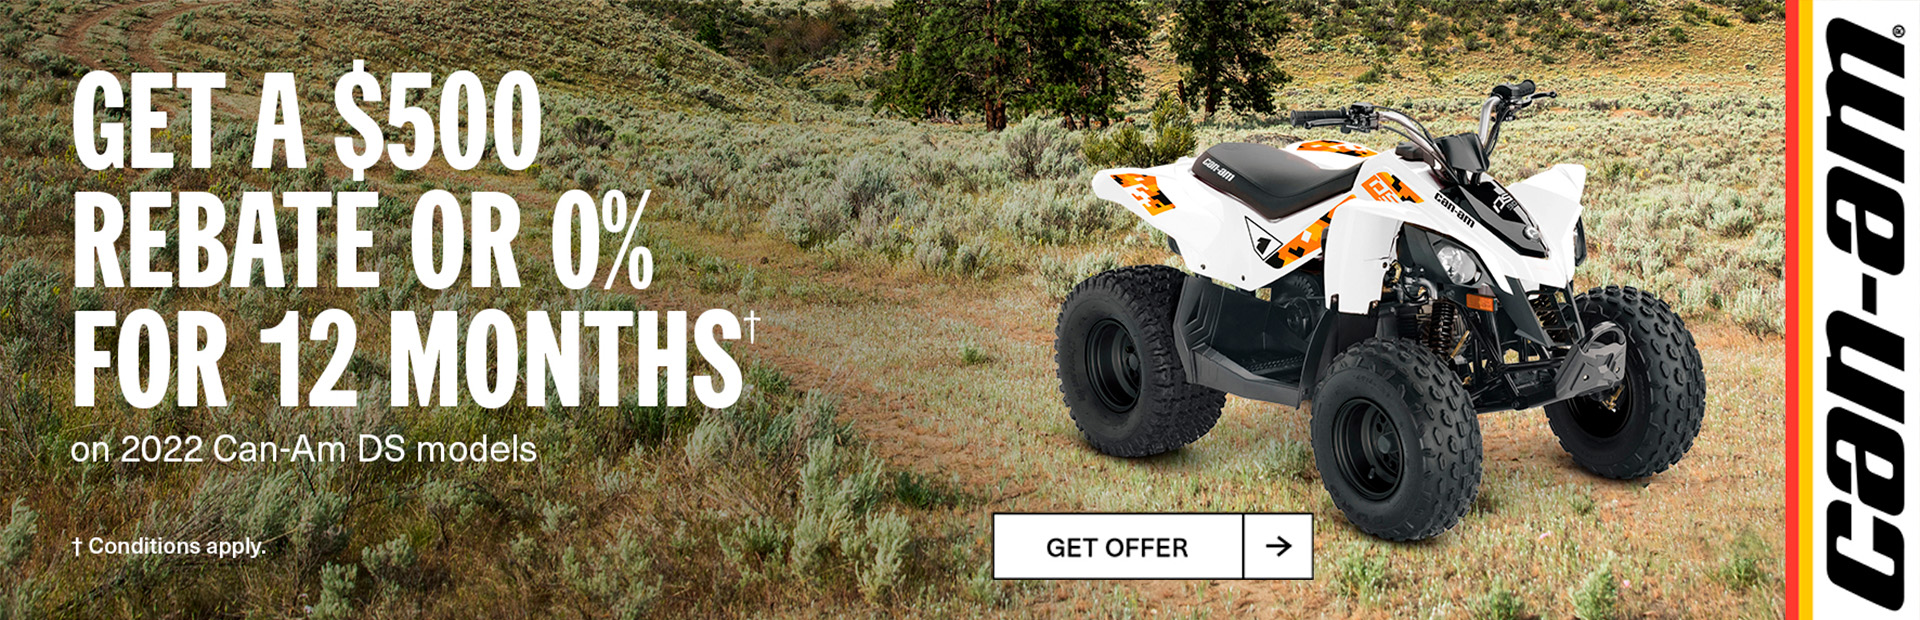 Can am Off Road - Retail Promotion at Sloans Motorcycle ATV, Murfreesboro, TN, 37129